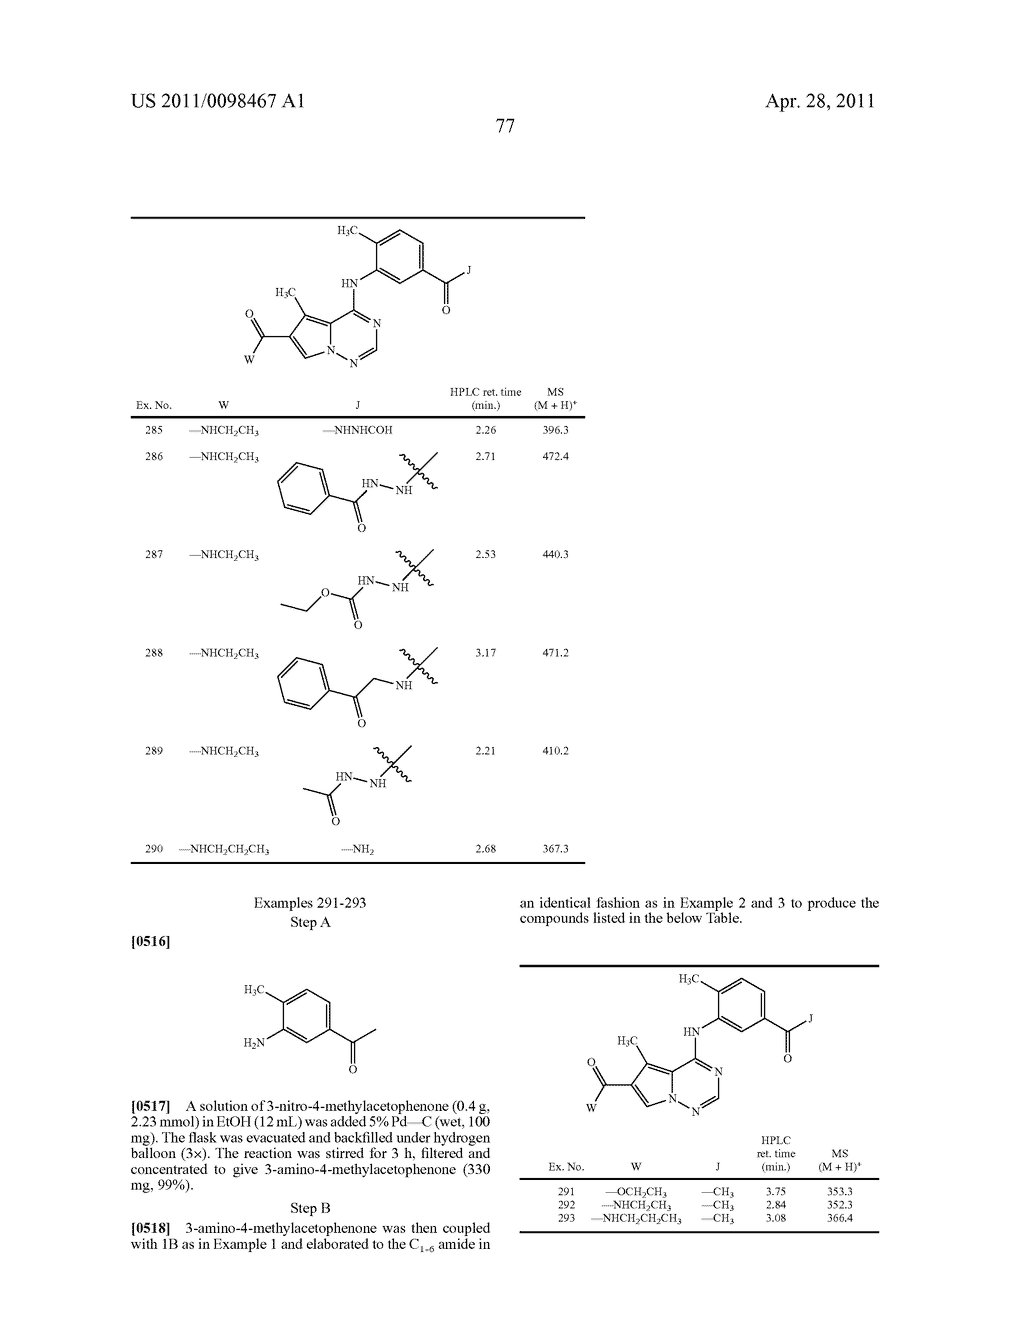 PYRROLO-TRIAZINE ANILINE COMPOUNDS USEFUL AS KINASE INHIBITORS - diagram, schematic, and image 78